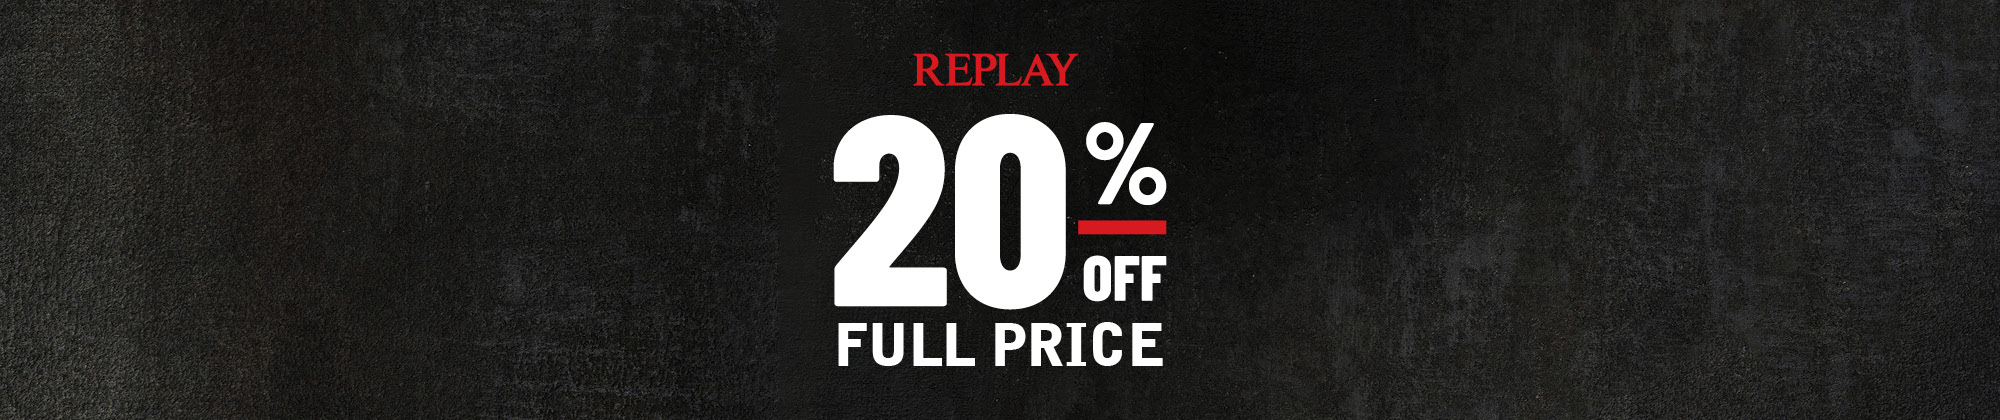 Replay Shop | & Women's Clothing, Accessories & More